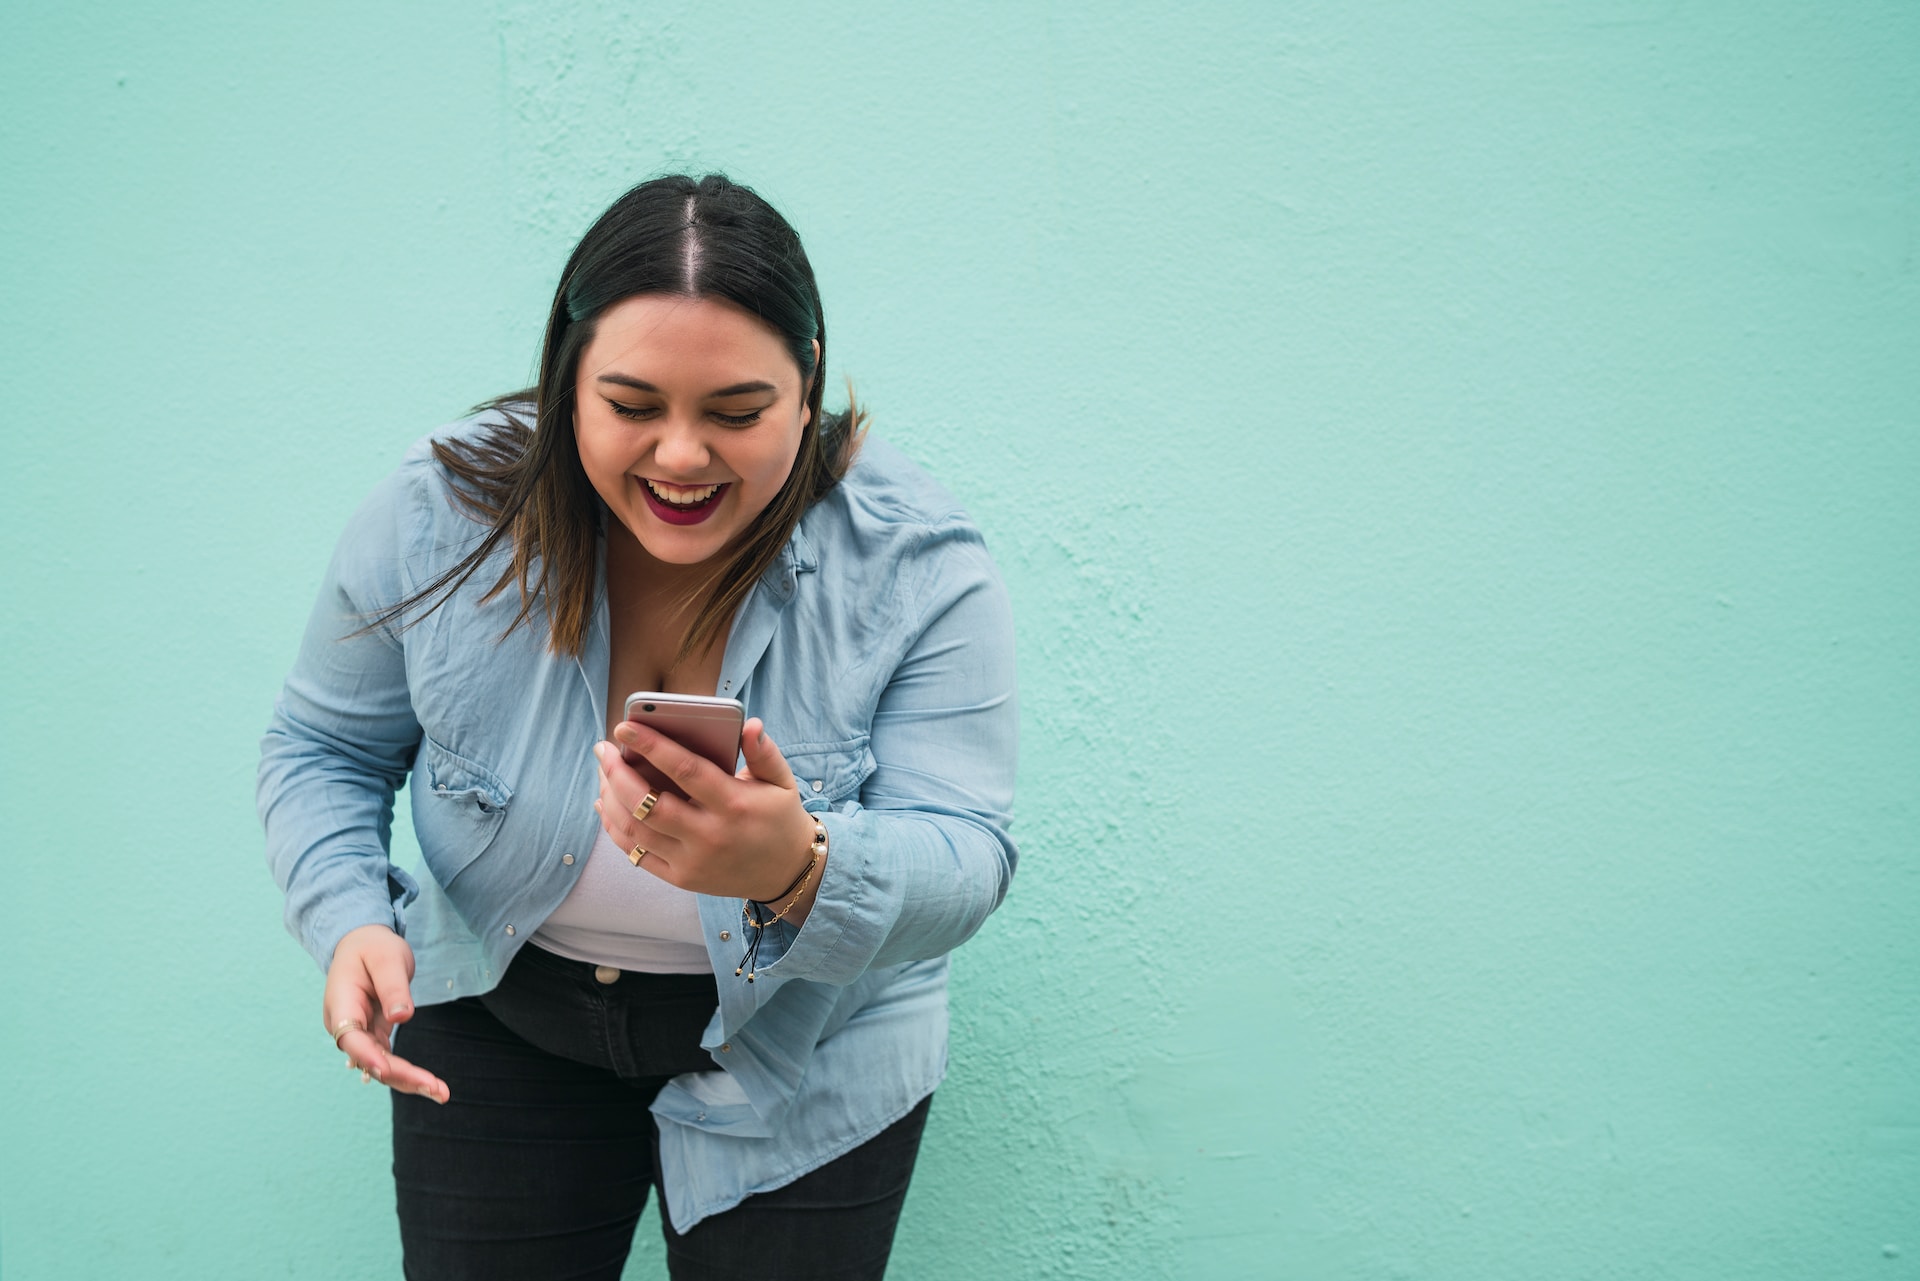 young woman leaning forward laughing while looking at the phone in her hand